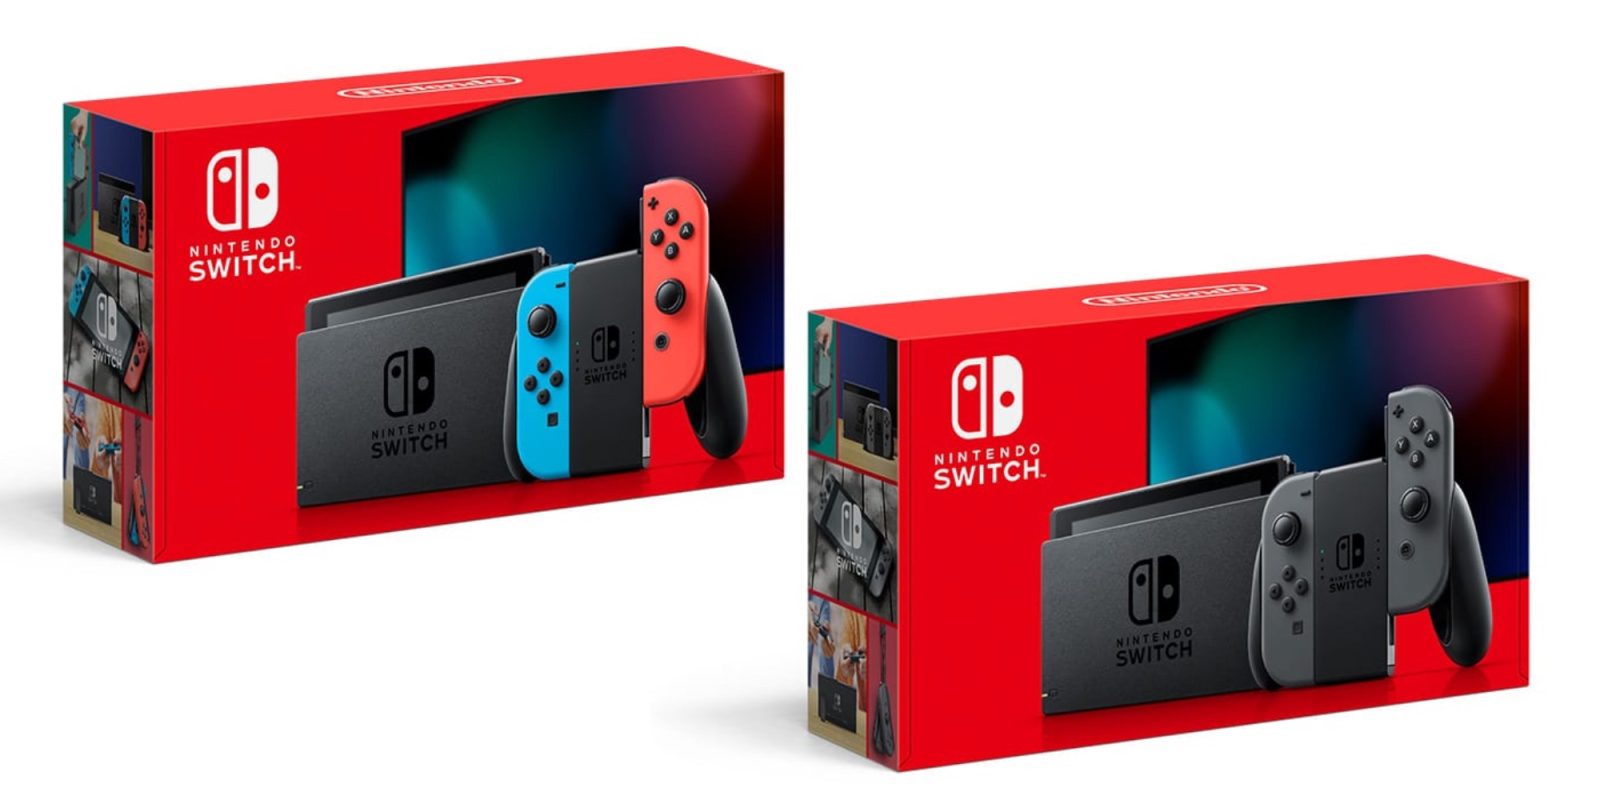 Nintendo Switch Building A New Generation Of Hardware From